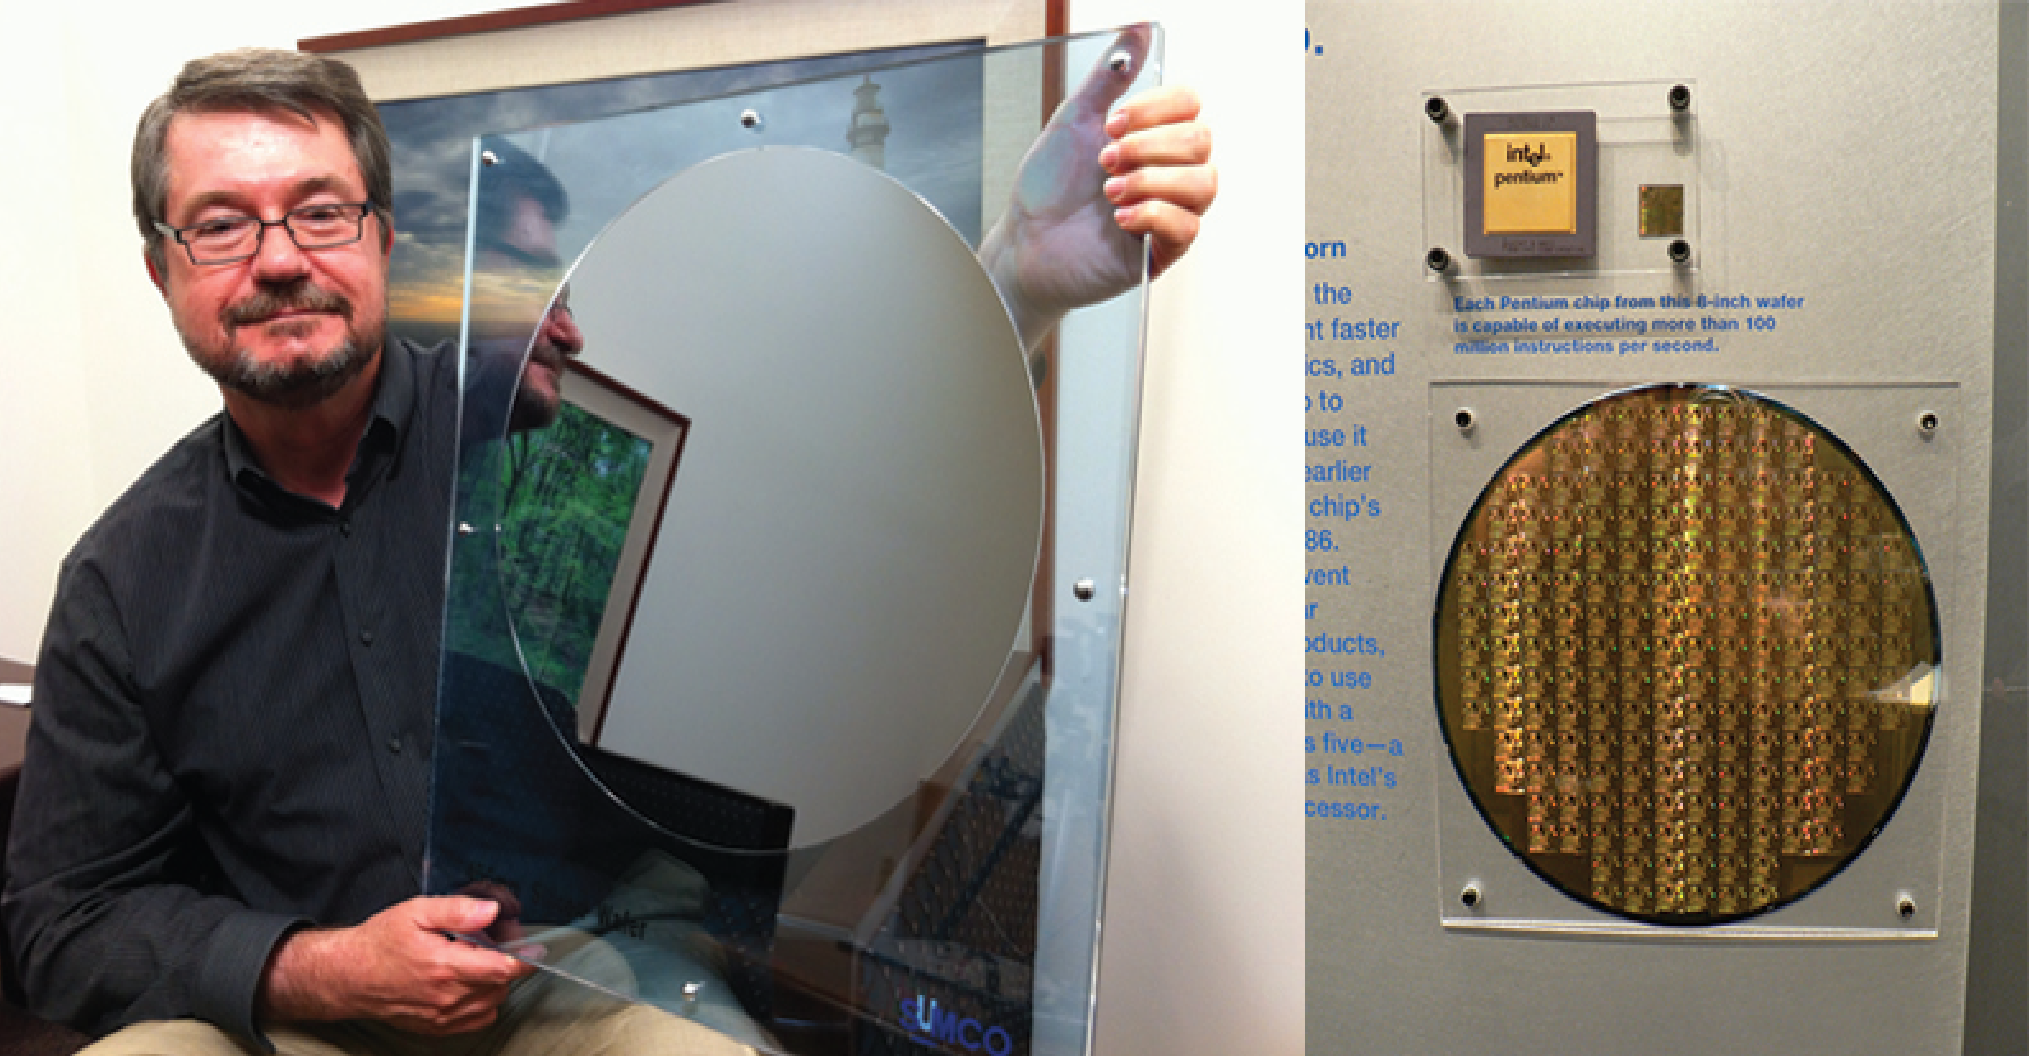 Two photos are shown. The first image shows a man holding a round, reflective disc held inside of a protective, clear container. The second image shows a round disc covered in metallic chips which is behind a protective covering.